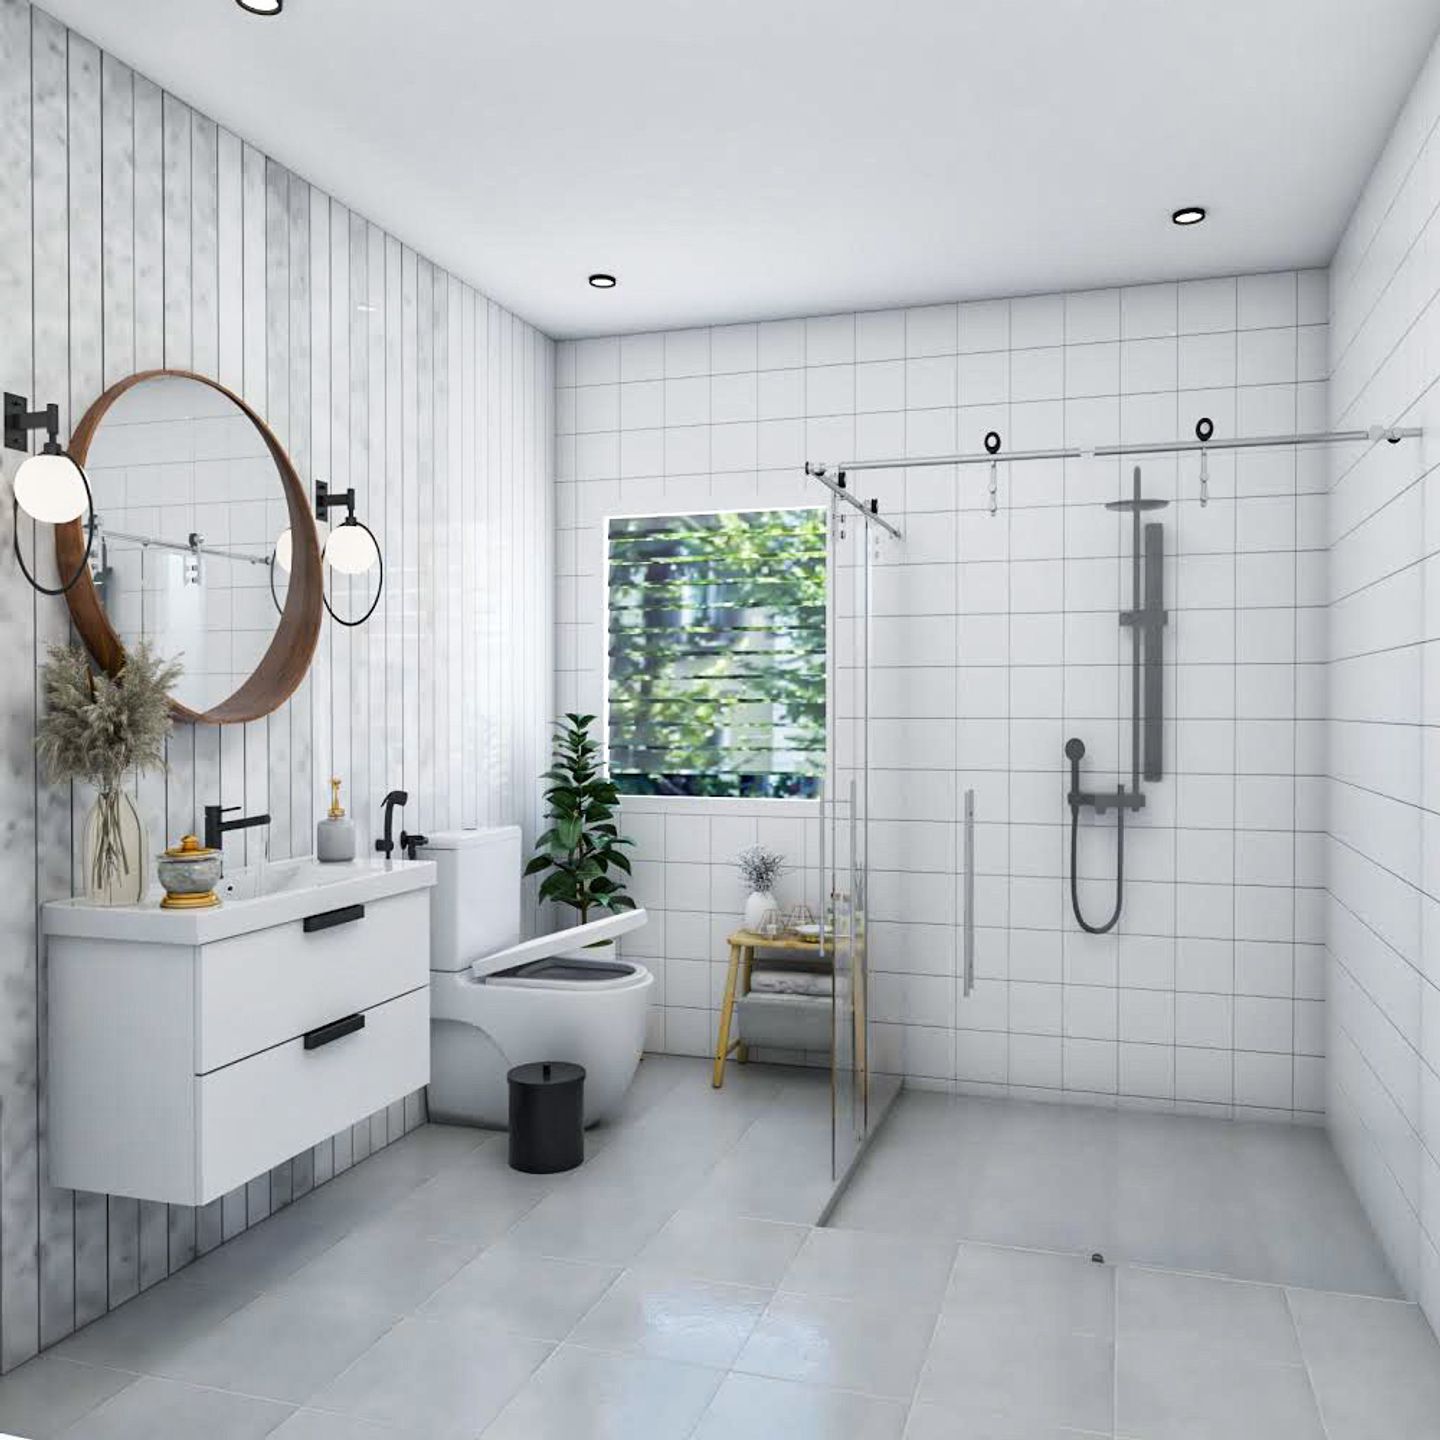 All-White Small Bathroom Design With Rectangular And Square Wall Tiles - Livspace